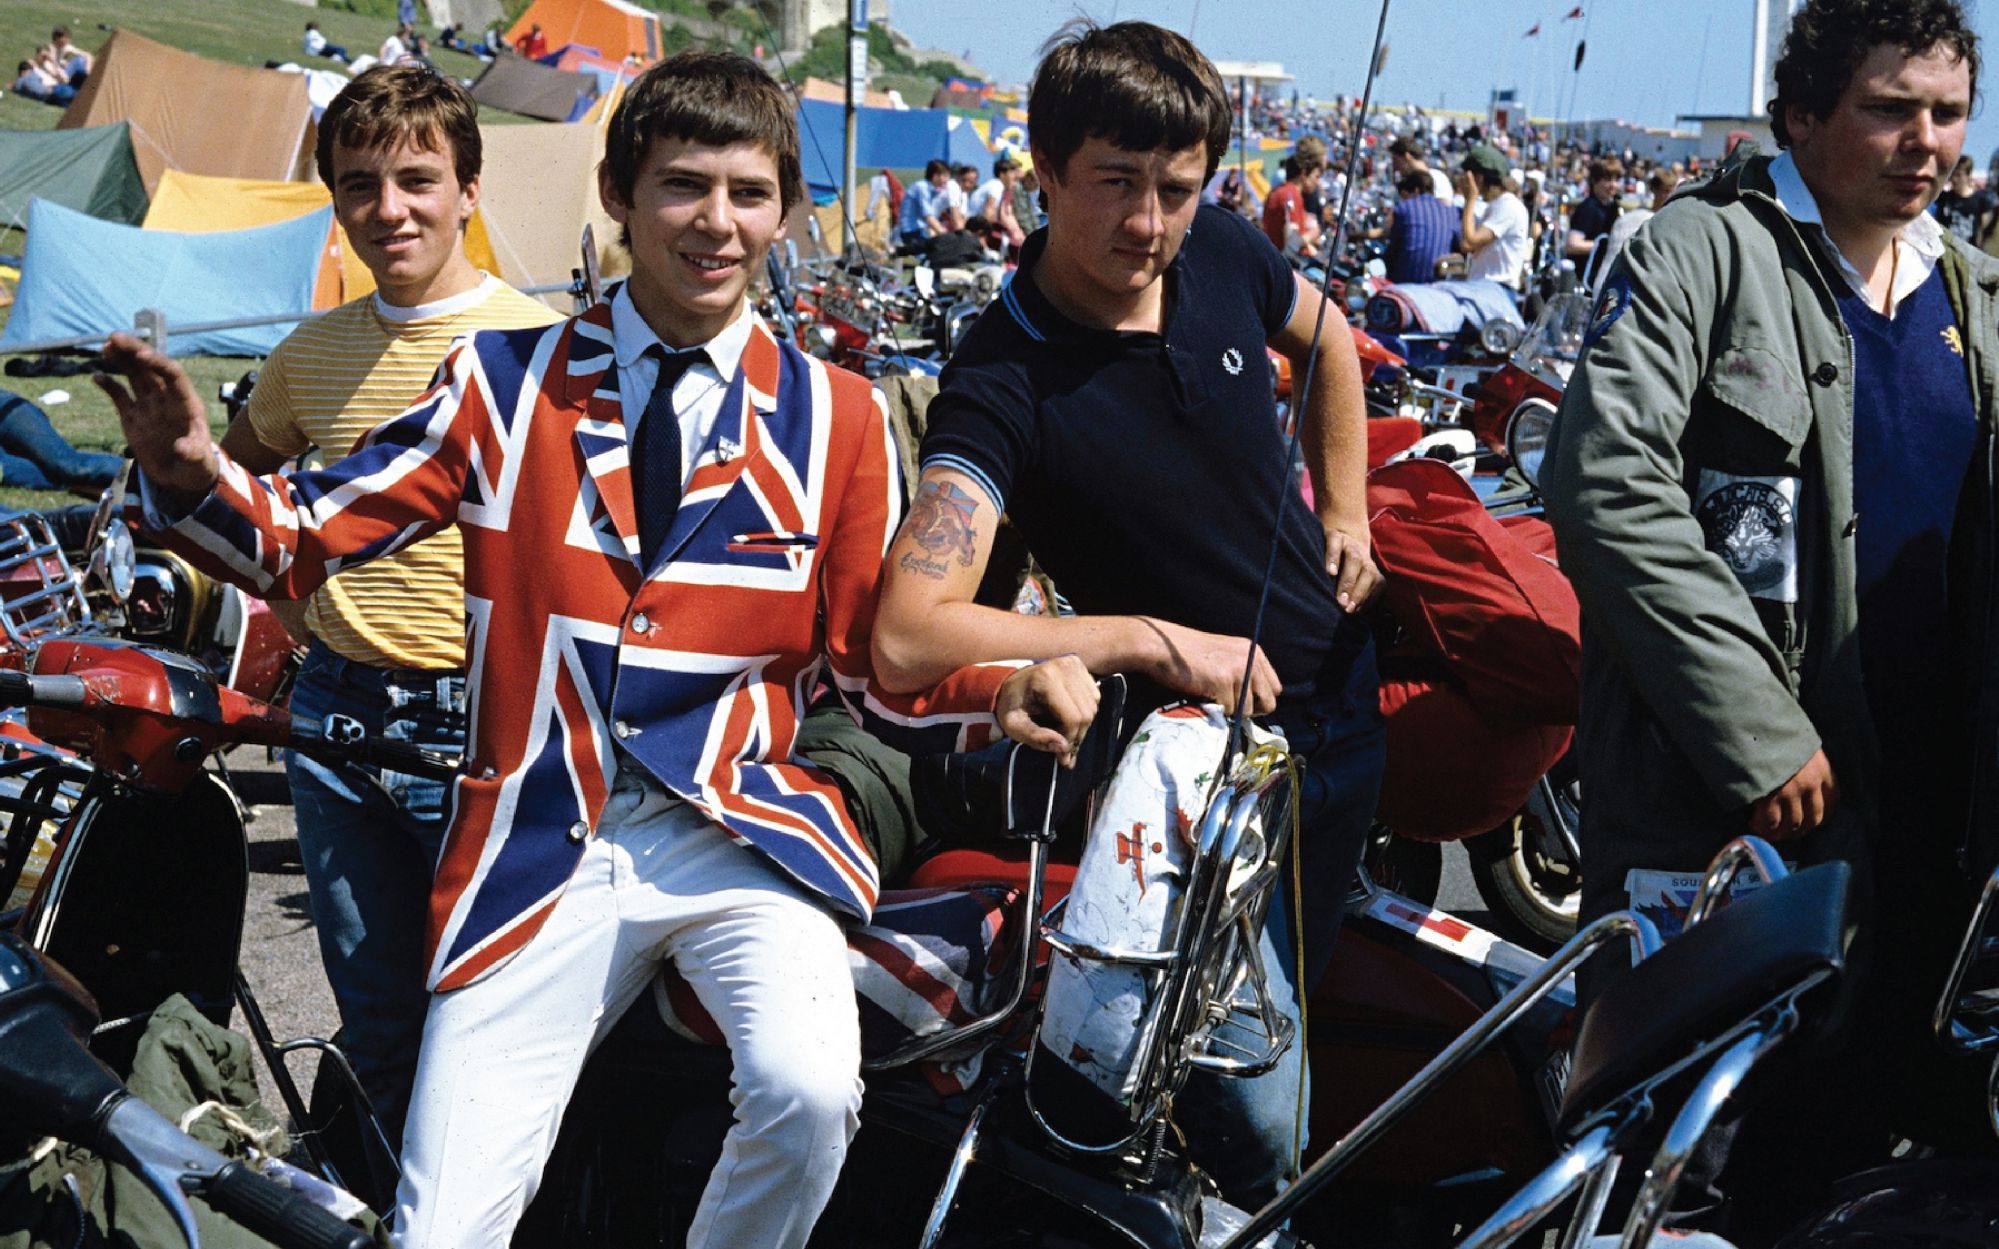 Mods: the style